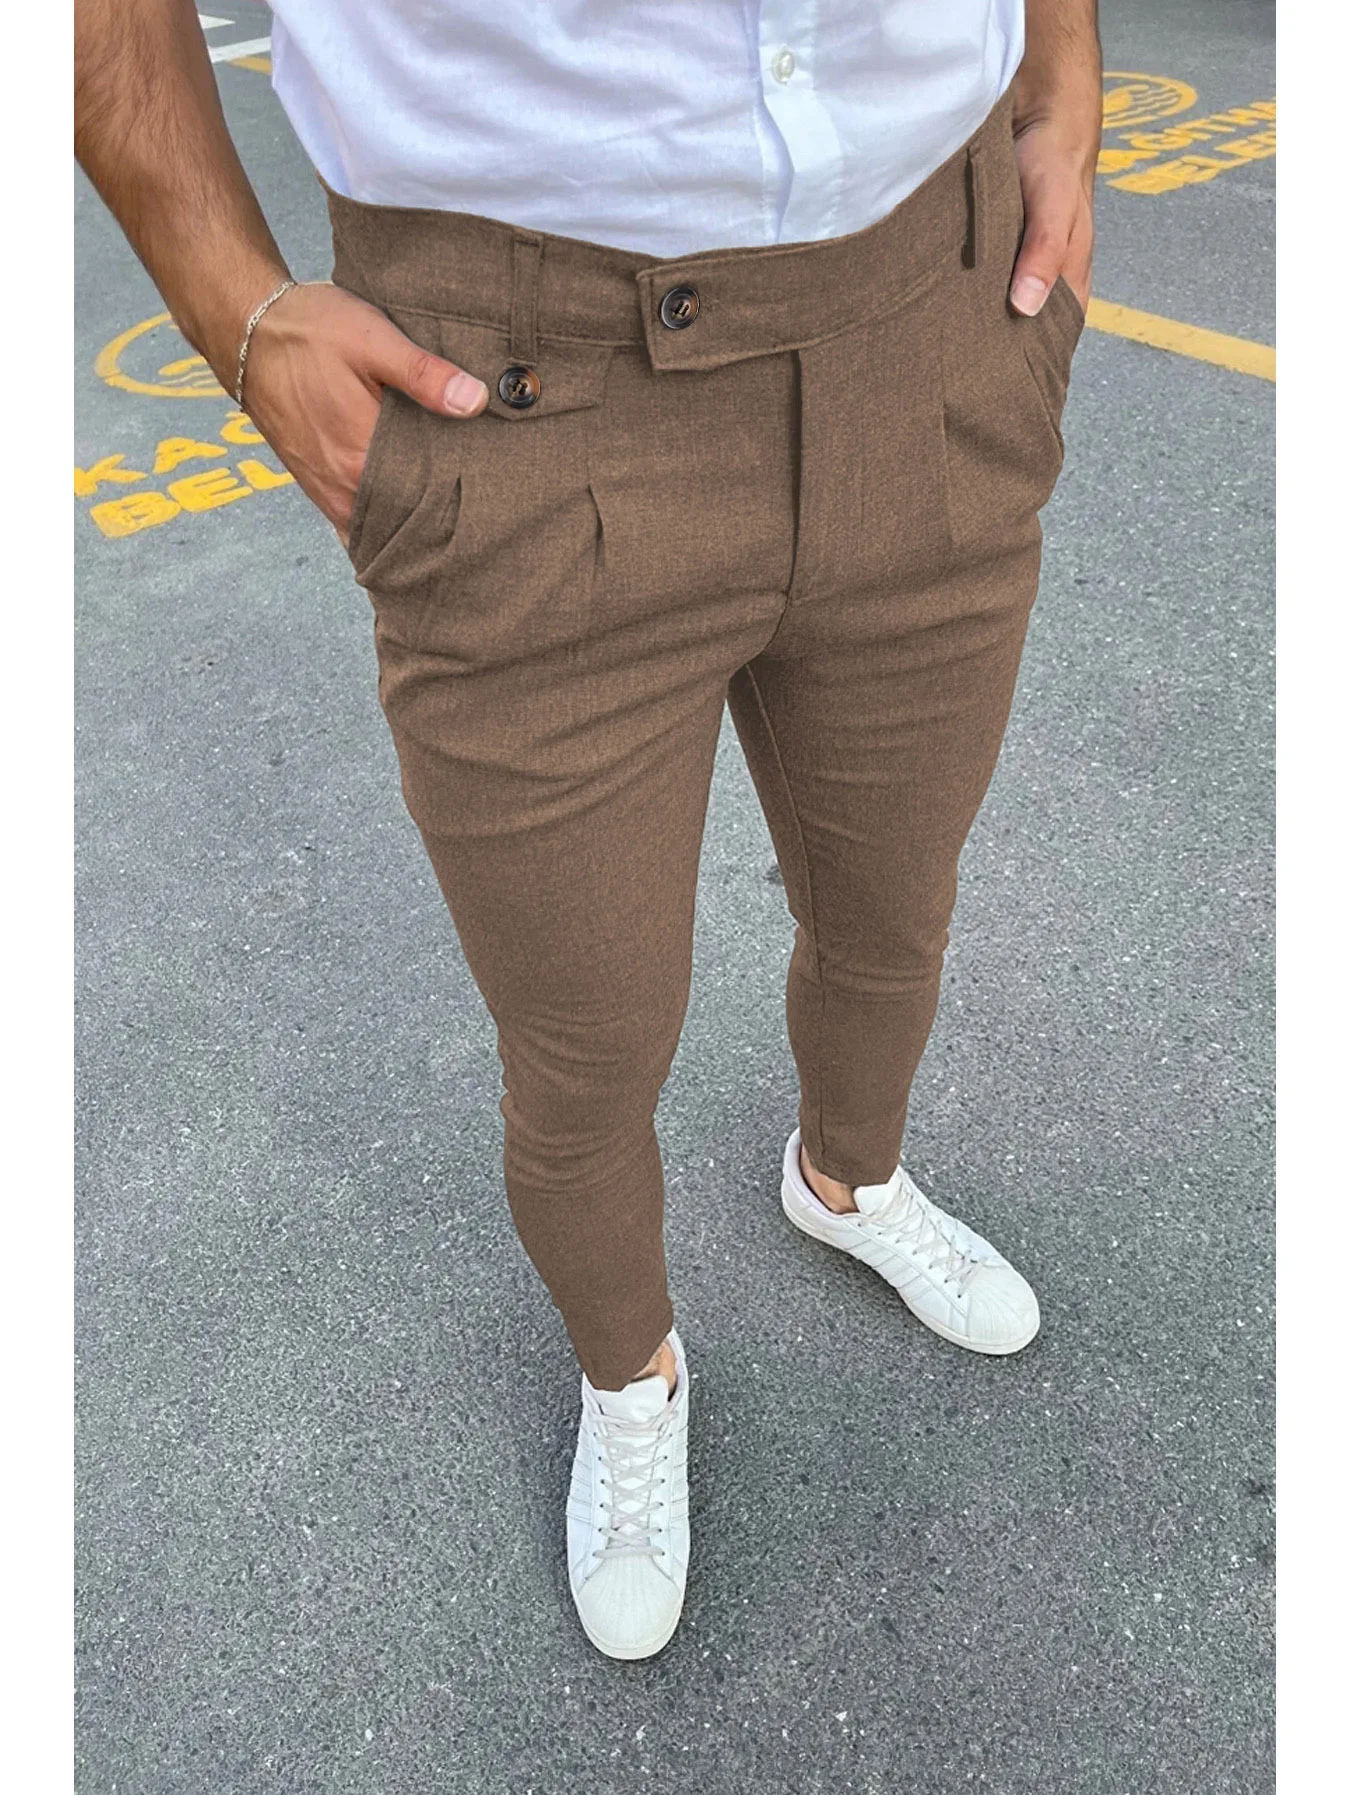 2023 New Men's Casual Pants Fashion Solid Business Leisure Trousers Trend Cool Street Wear Office Pencil Pants Calças Masculinas 6